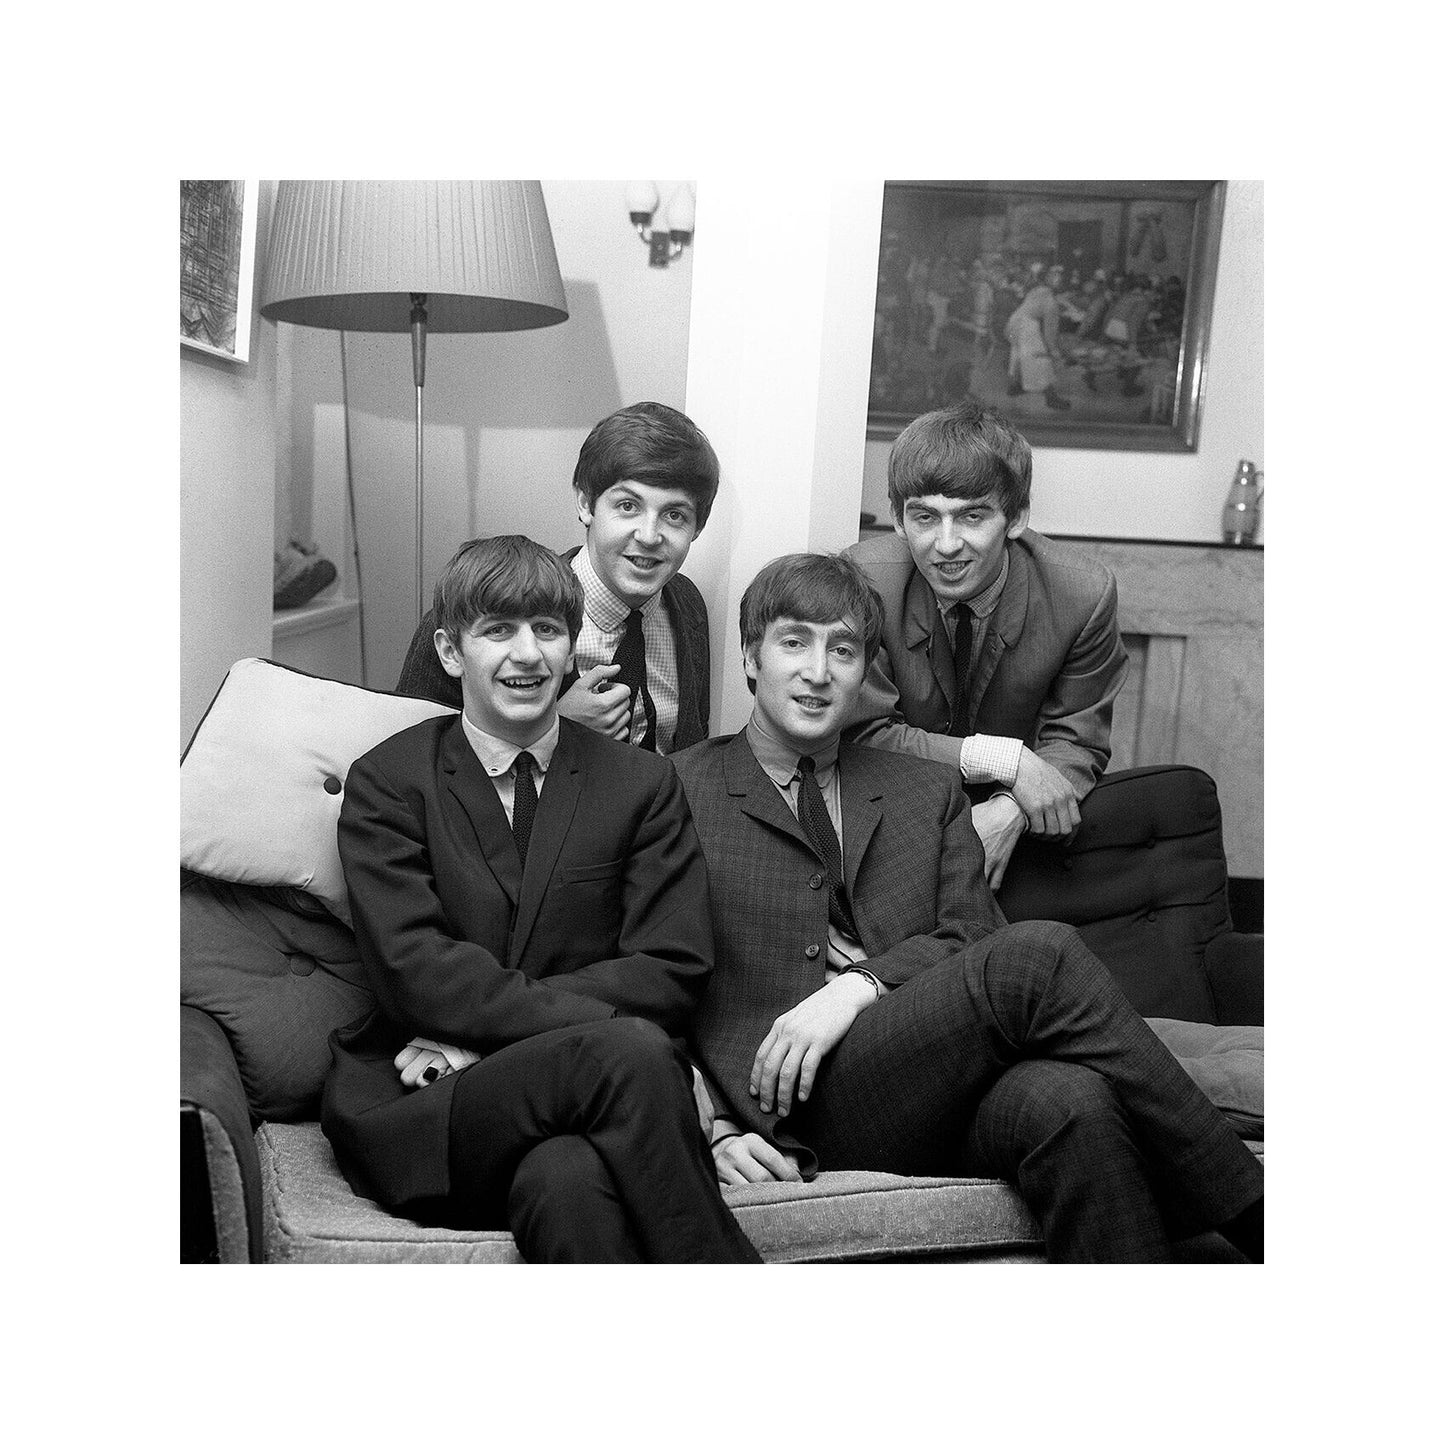 The Beatles - At the Home of Donald Zec, England, Print